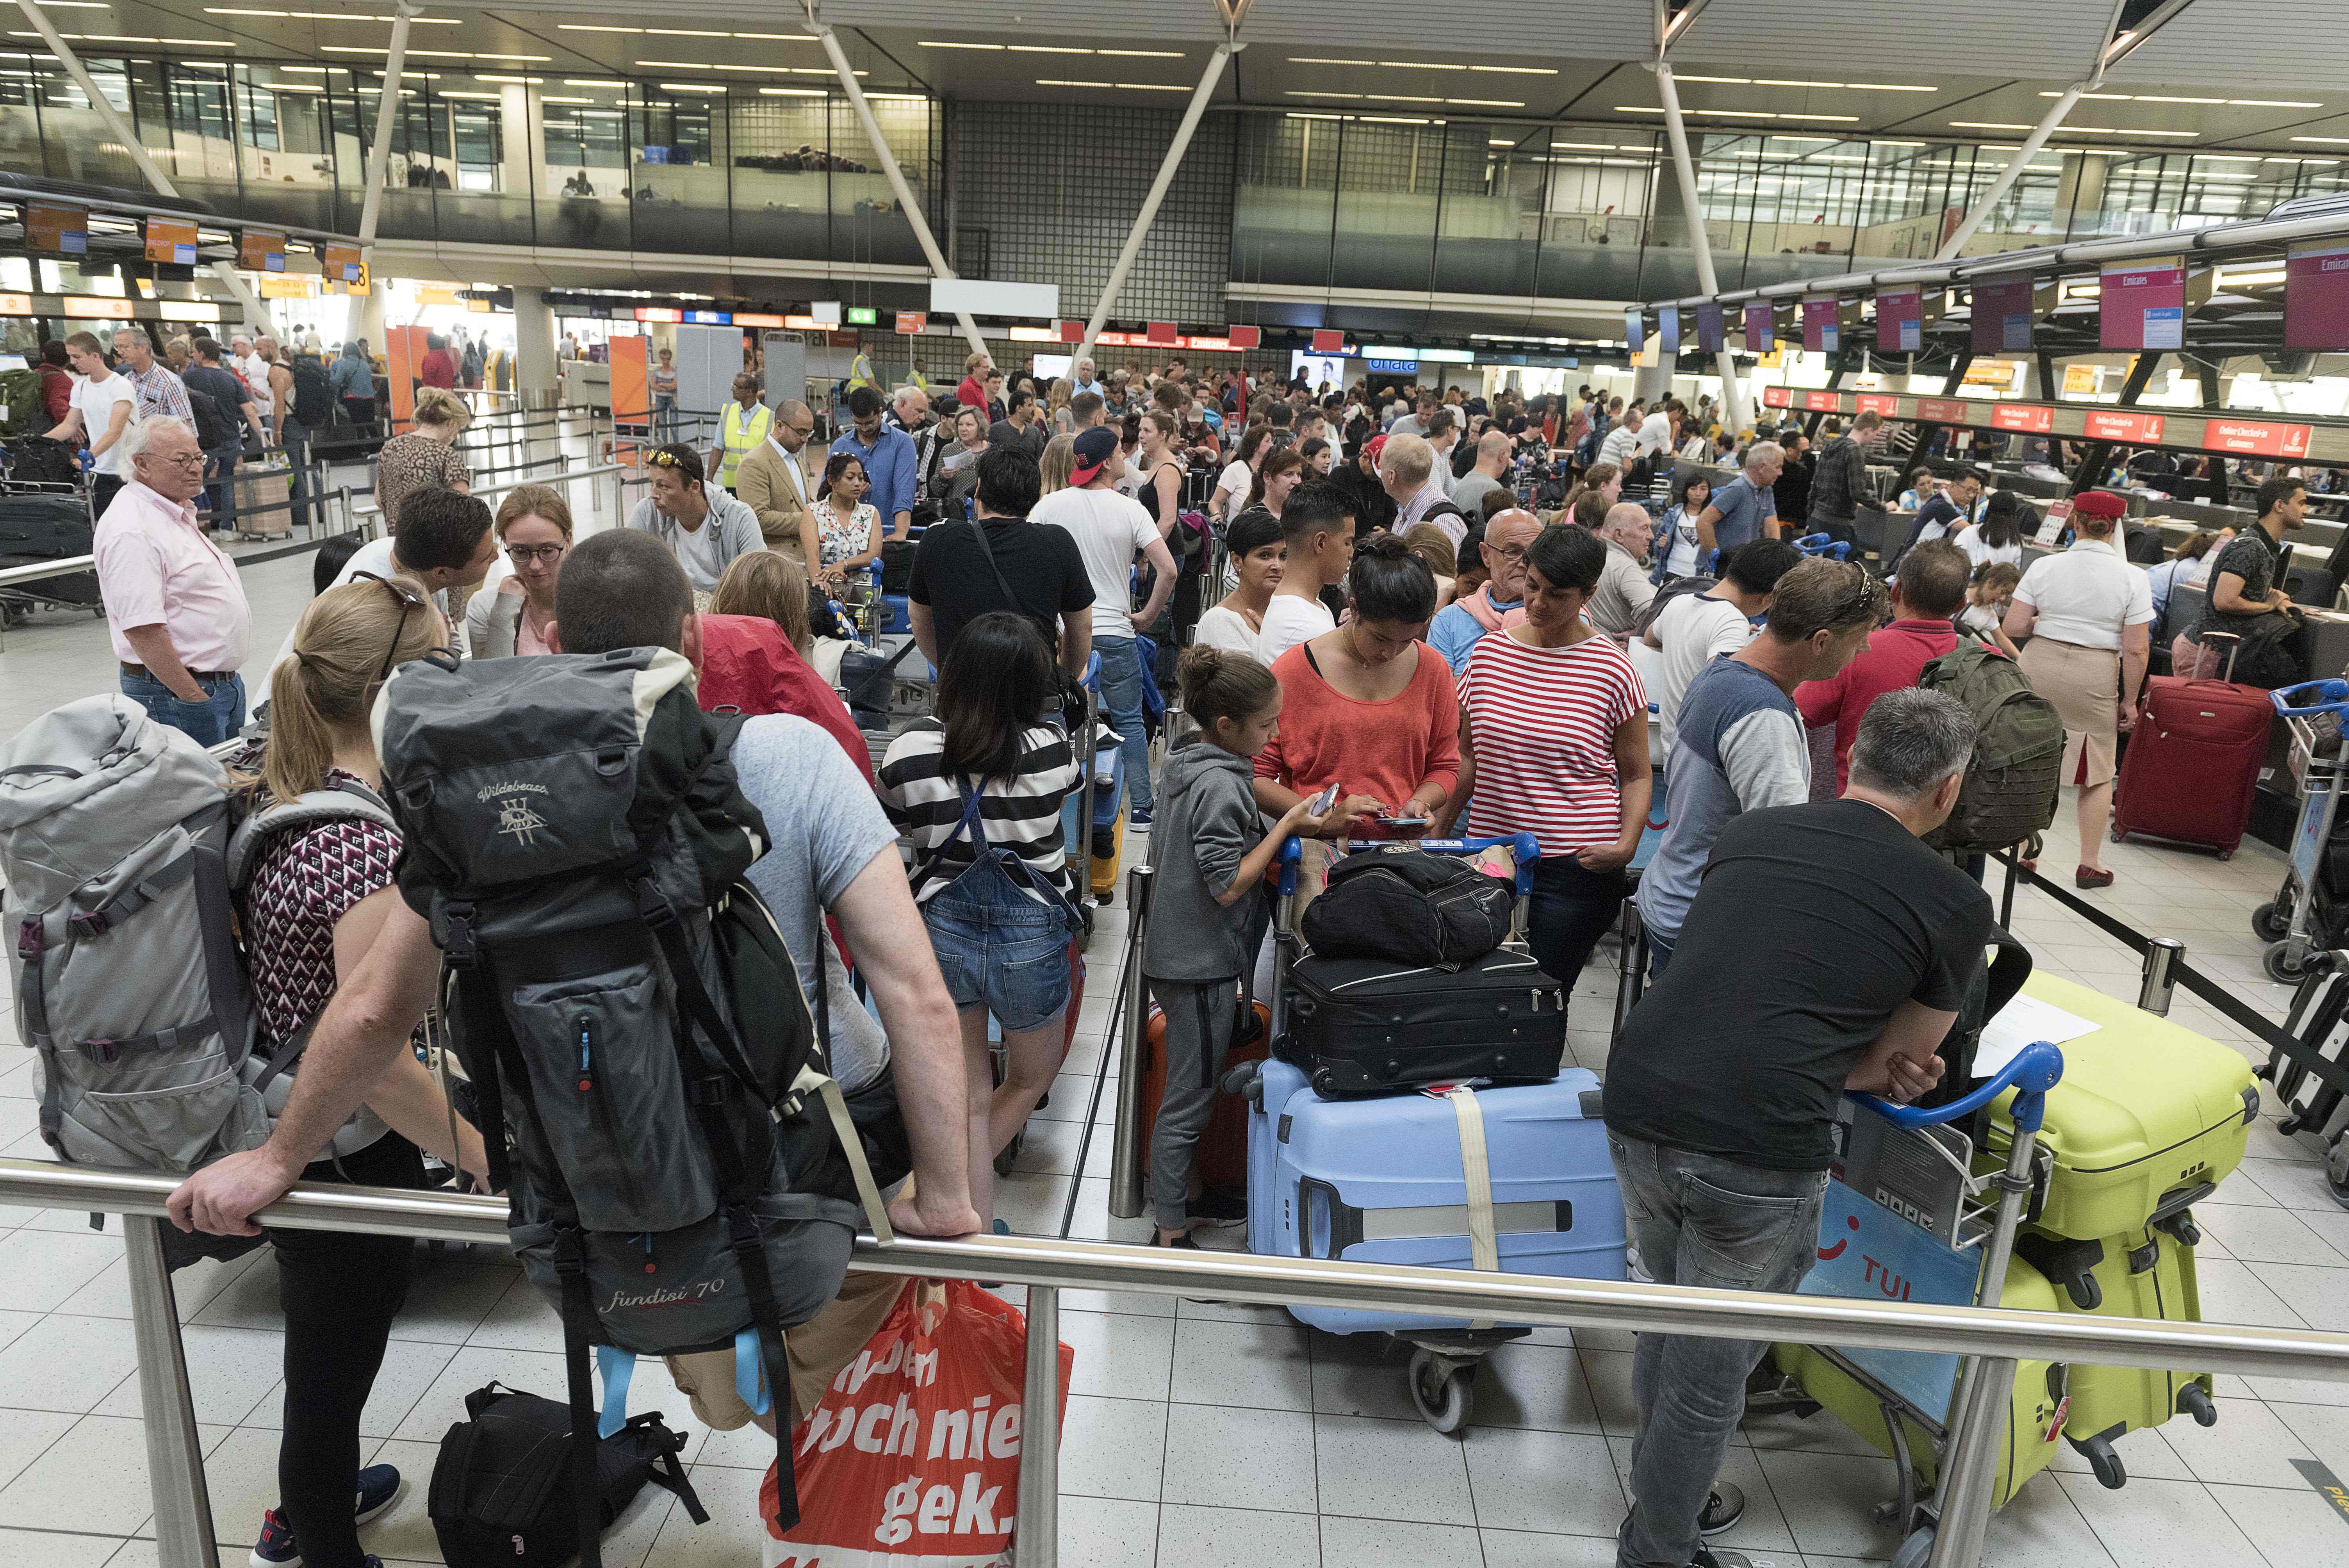 Queues at Schiphol airport in 2017